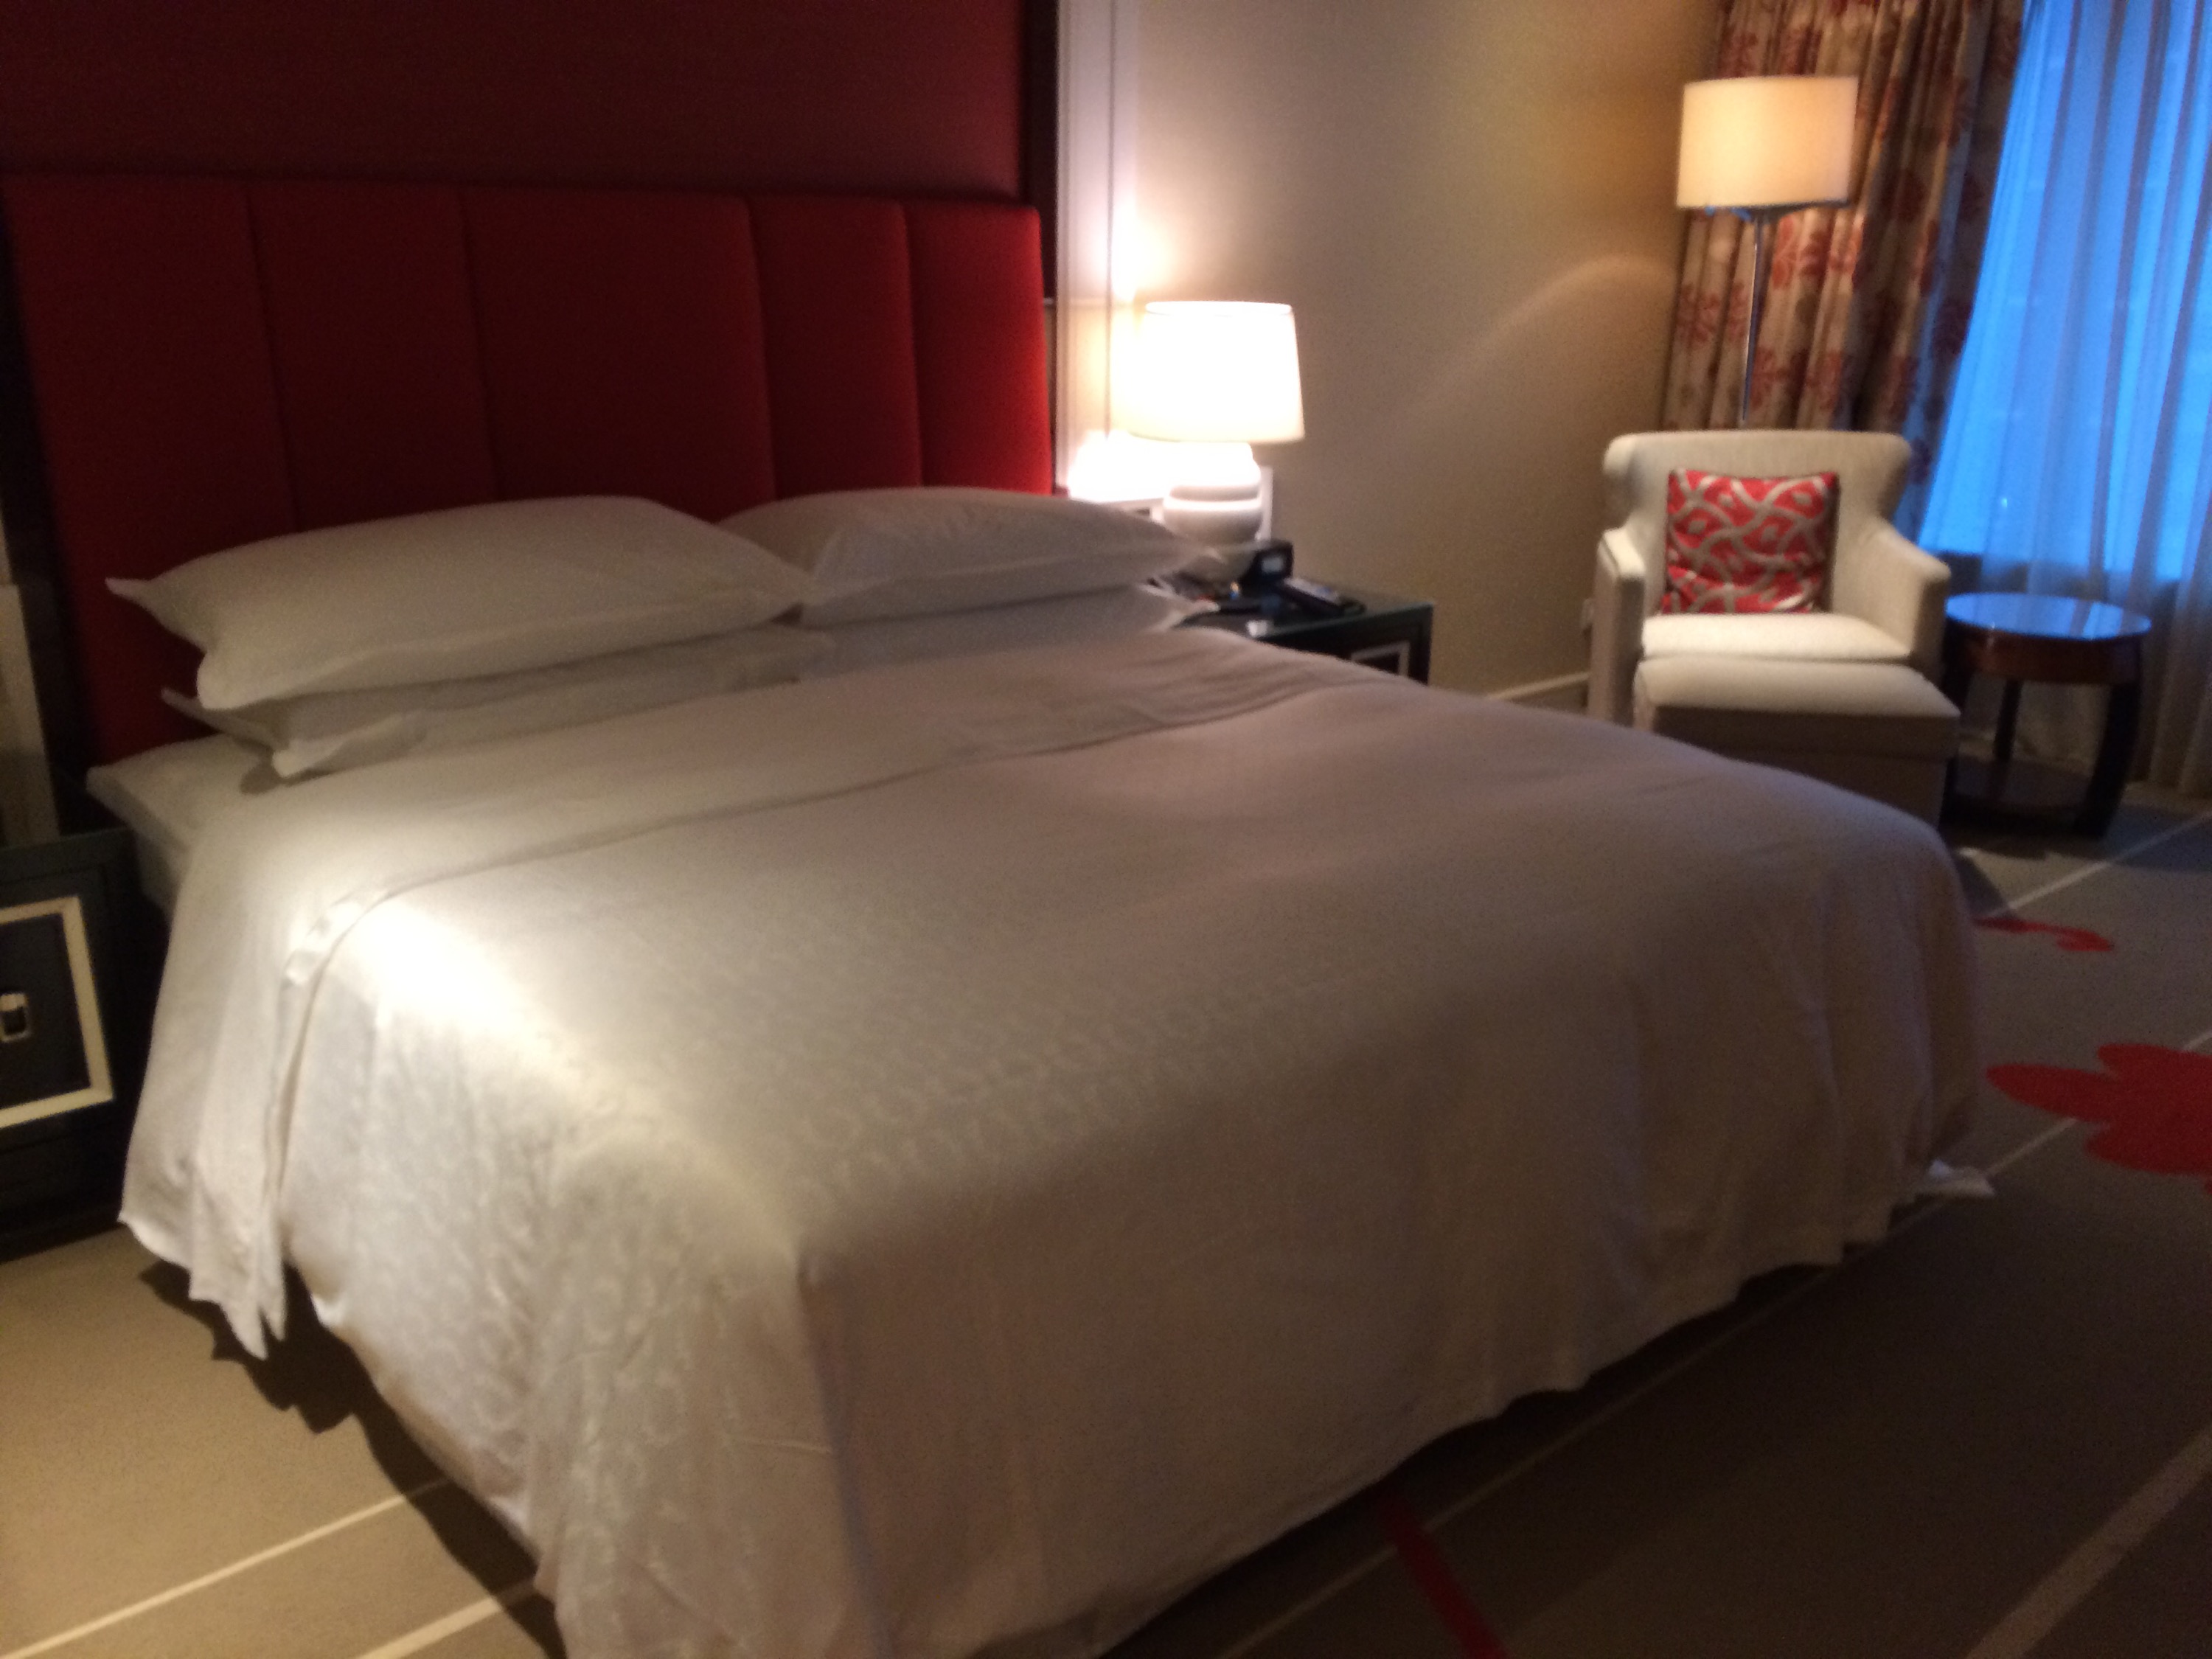 a bed with white sheets and a red headboard